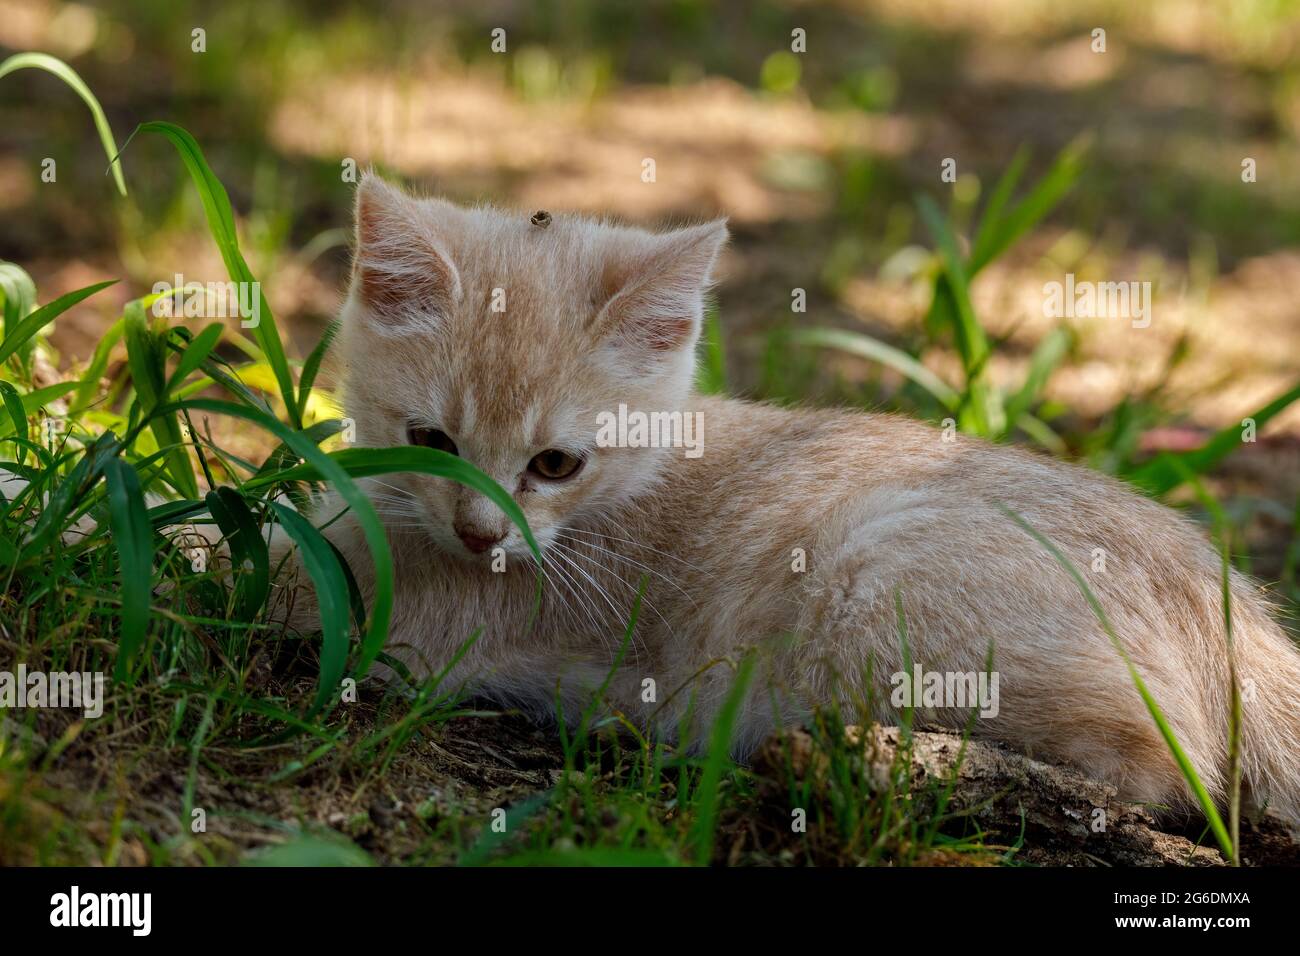 Litte kittens playing and learning to hunt. Stock Photo